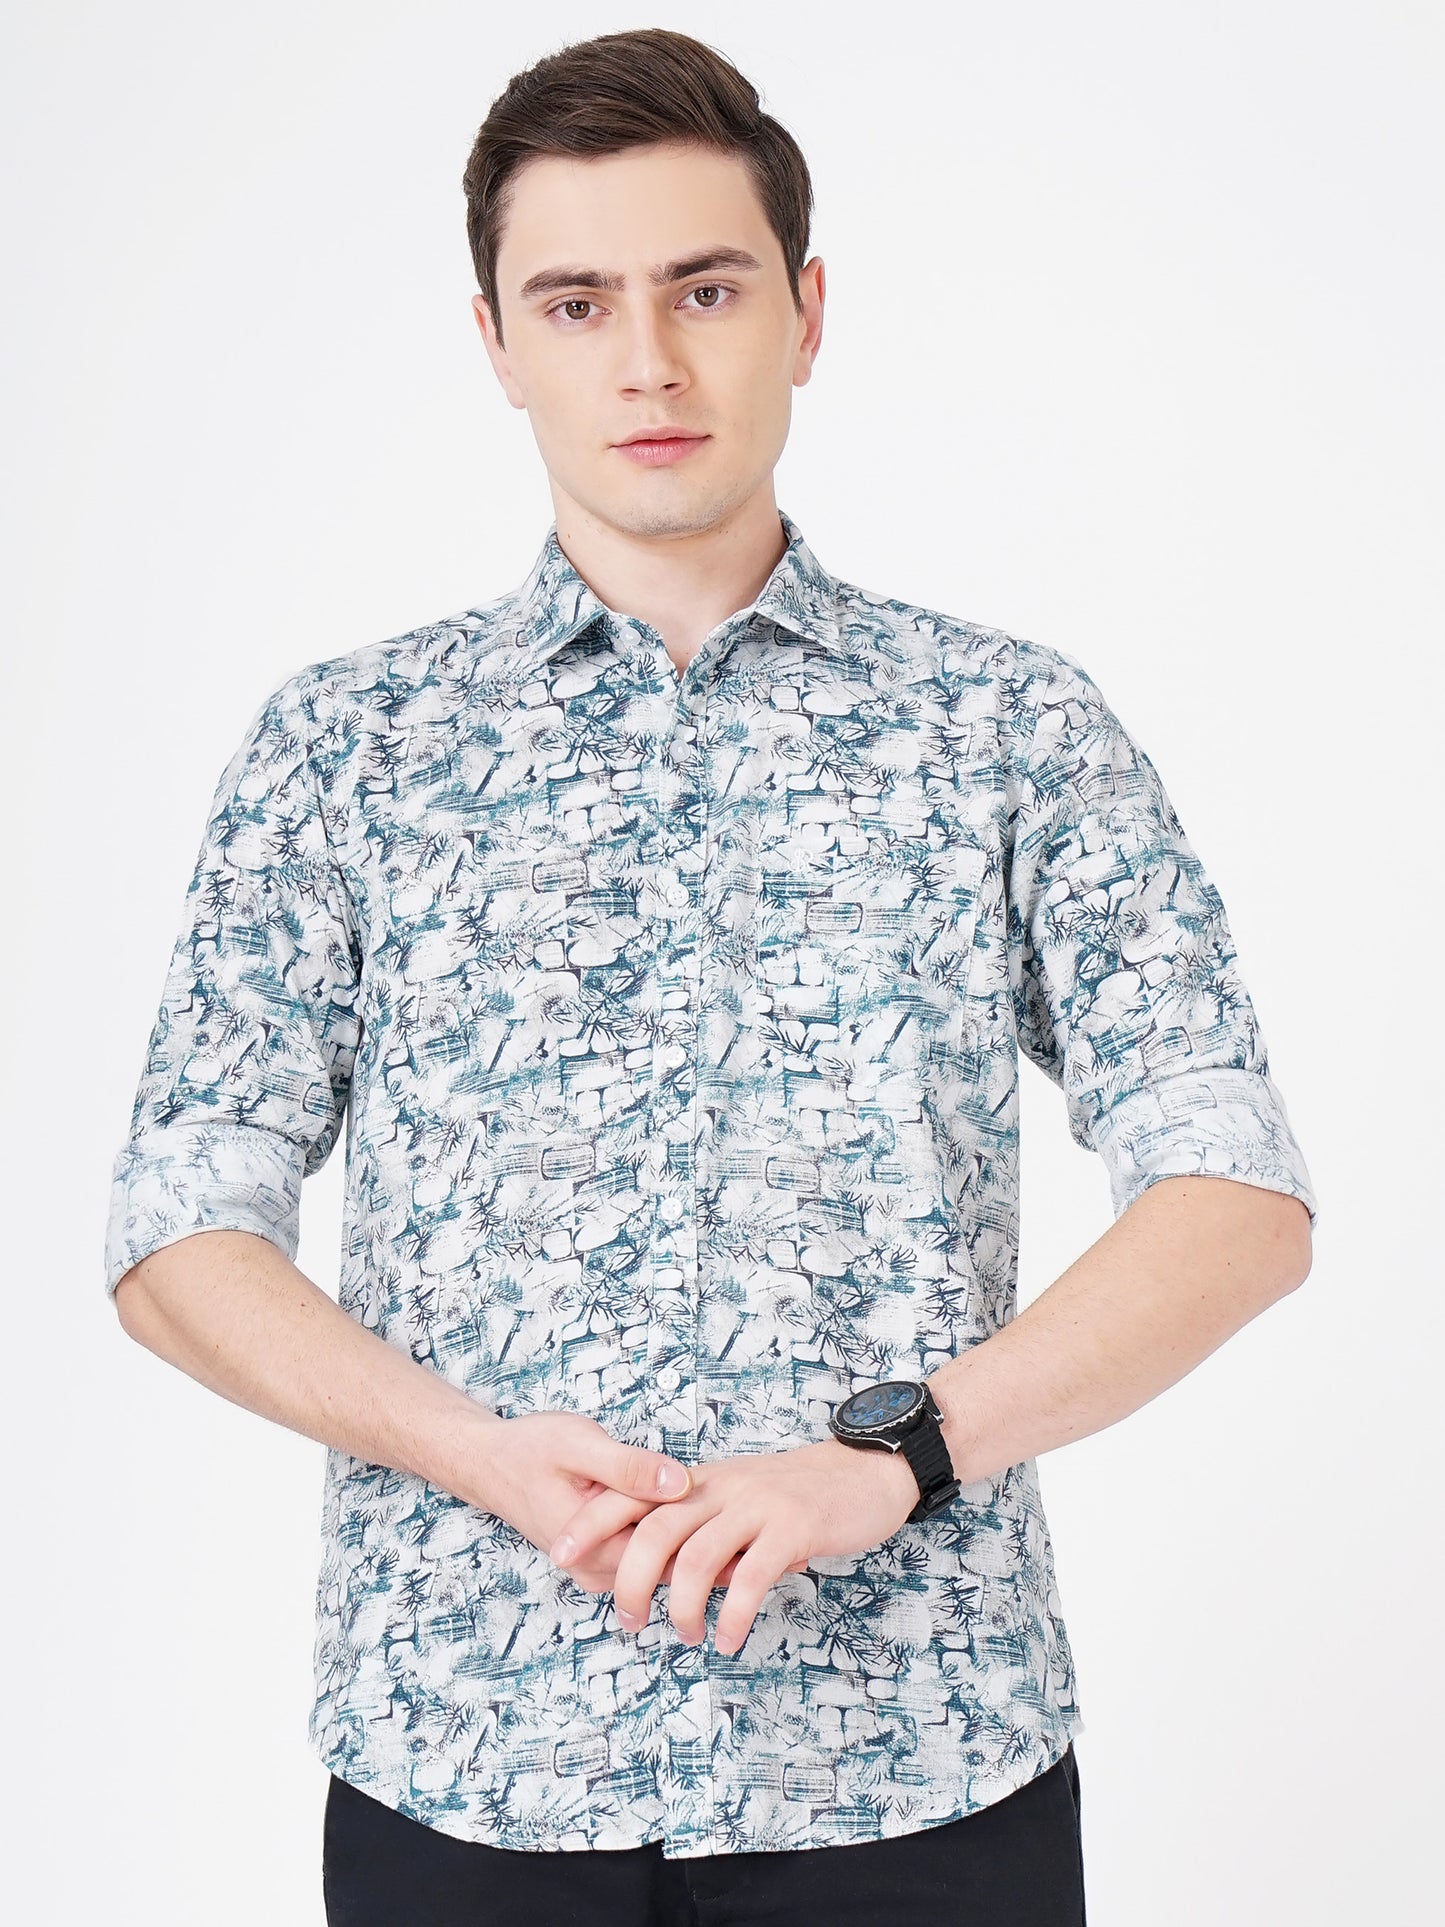 Rock Blue All Over Printed Shirt for Men 